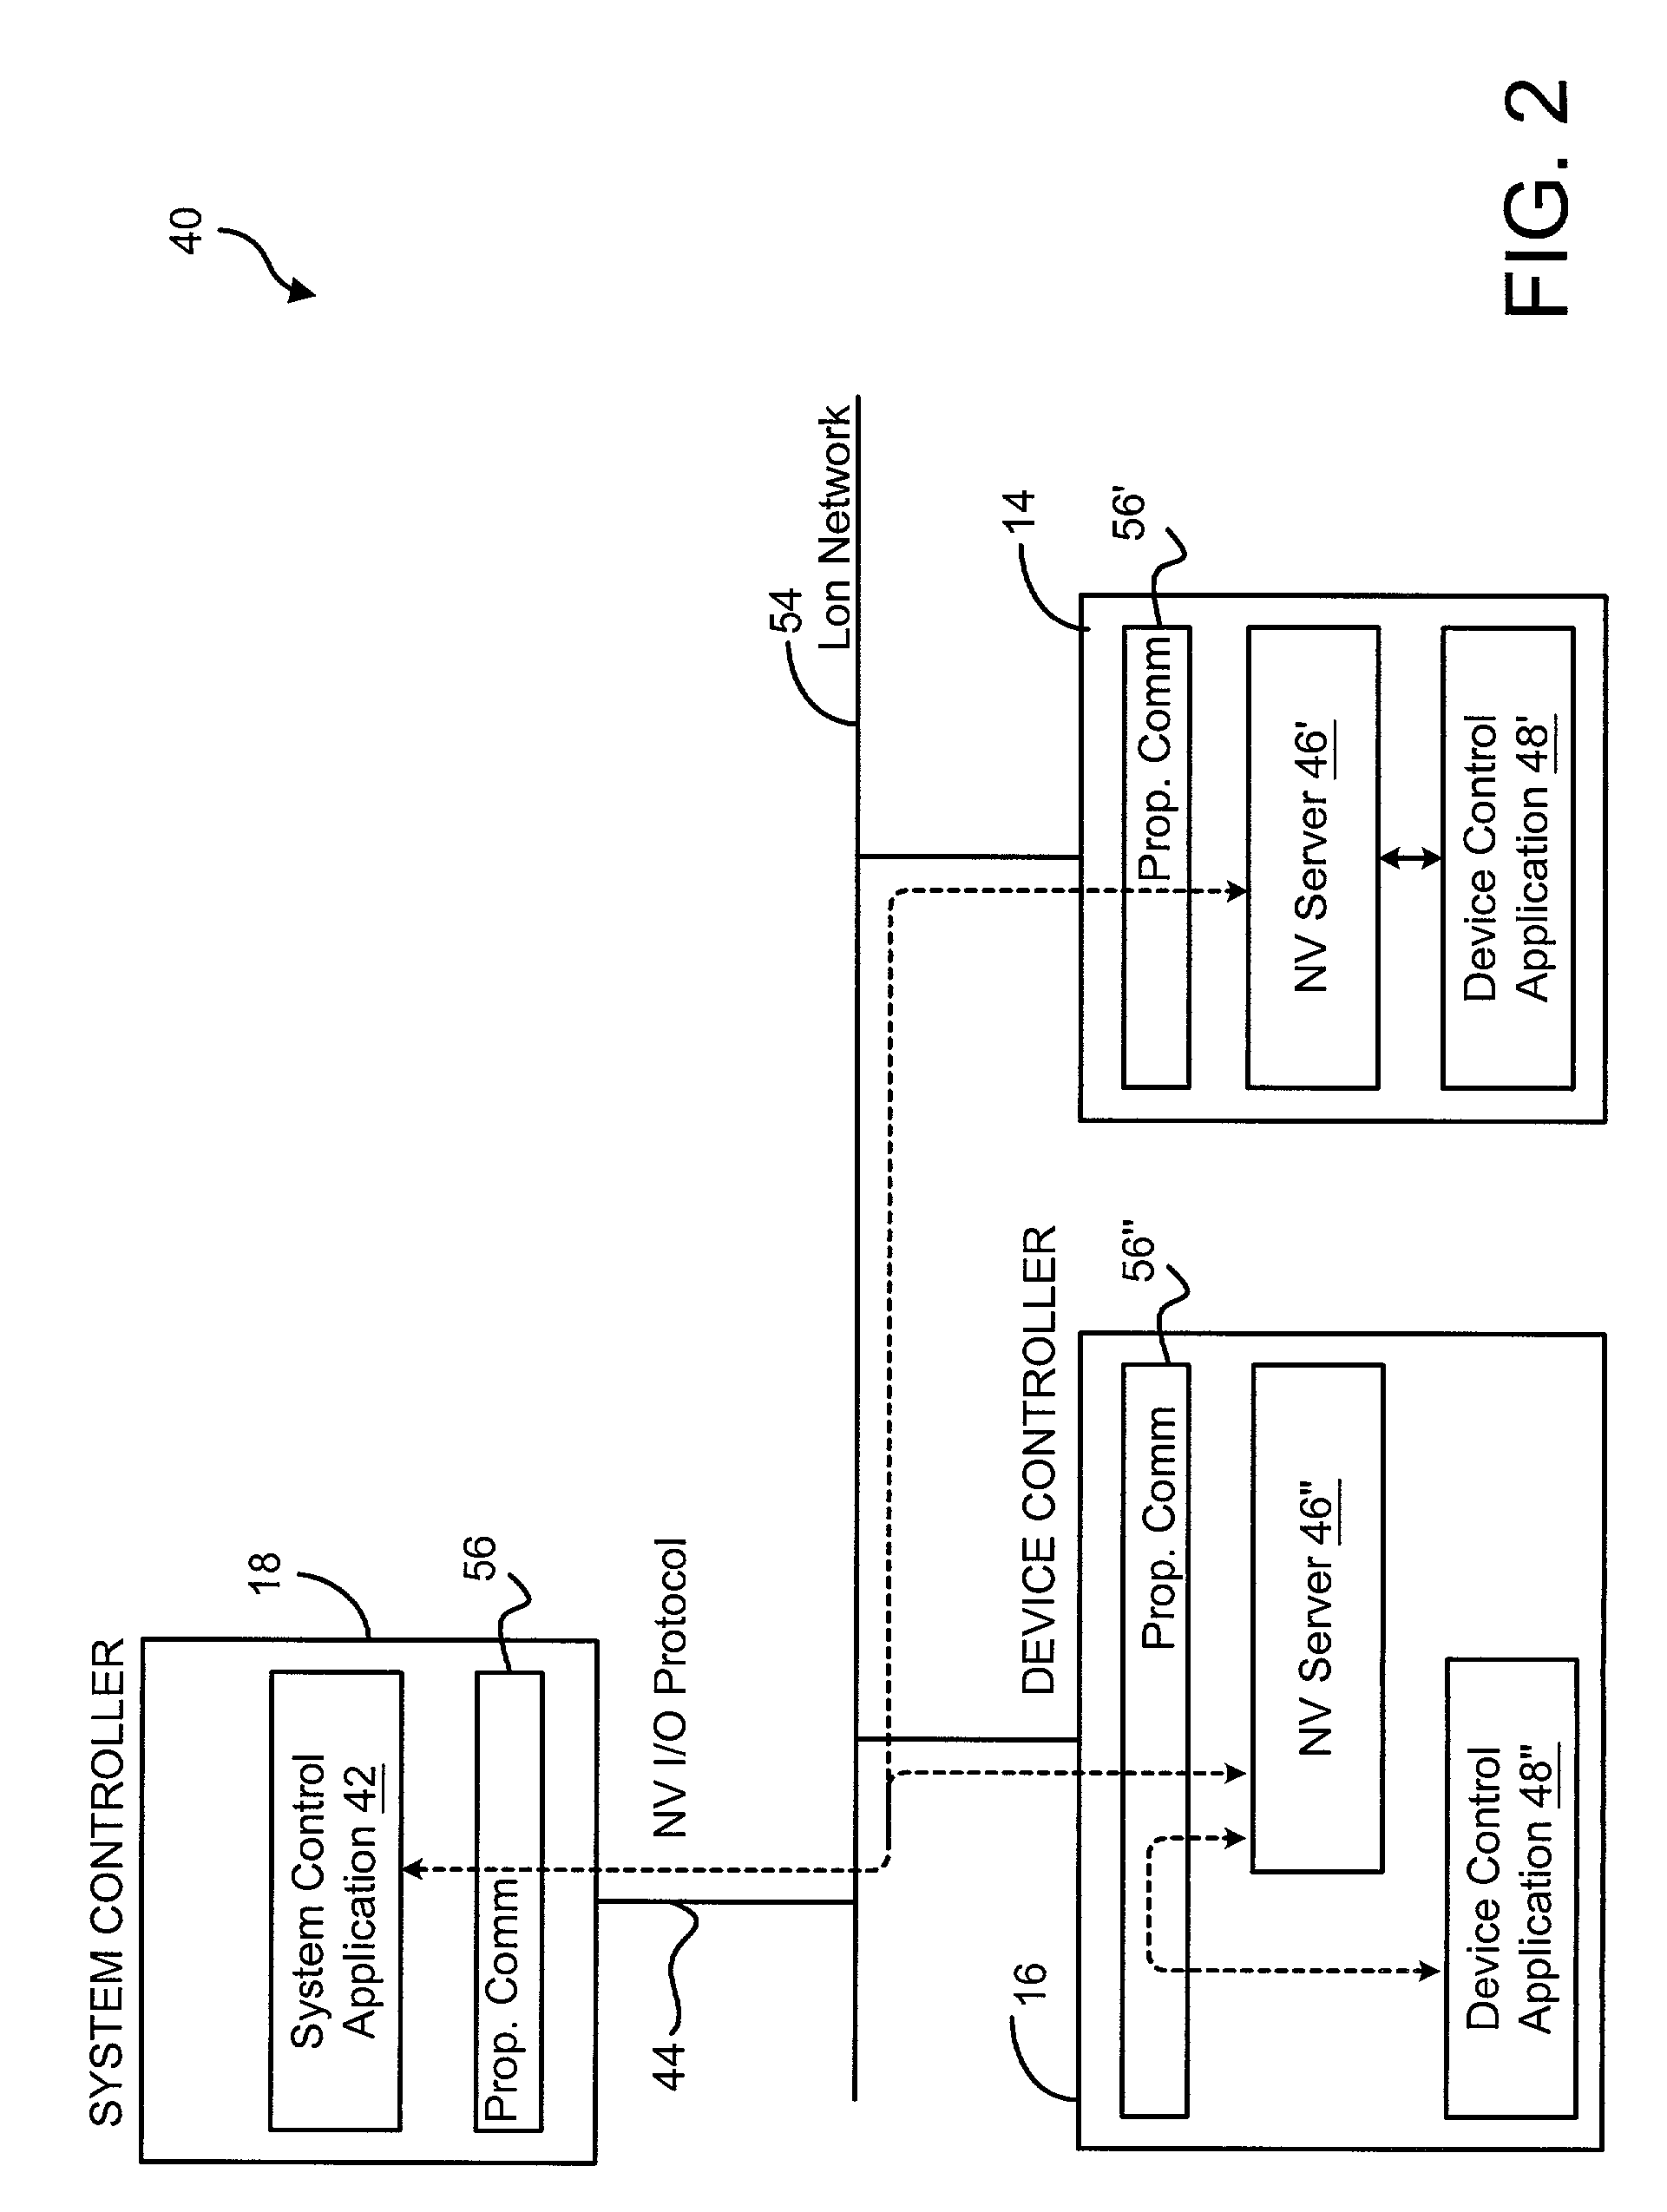 System and method for servicing messages between device controller nodes and via a lon network